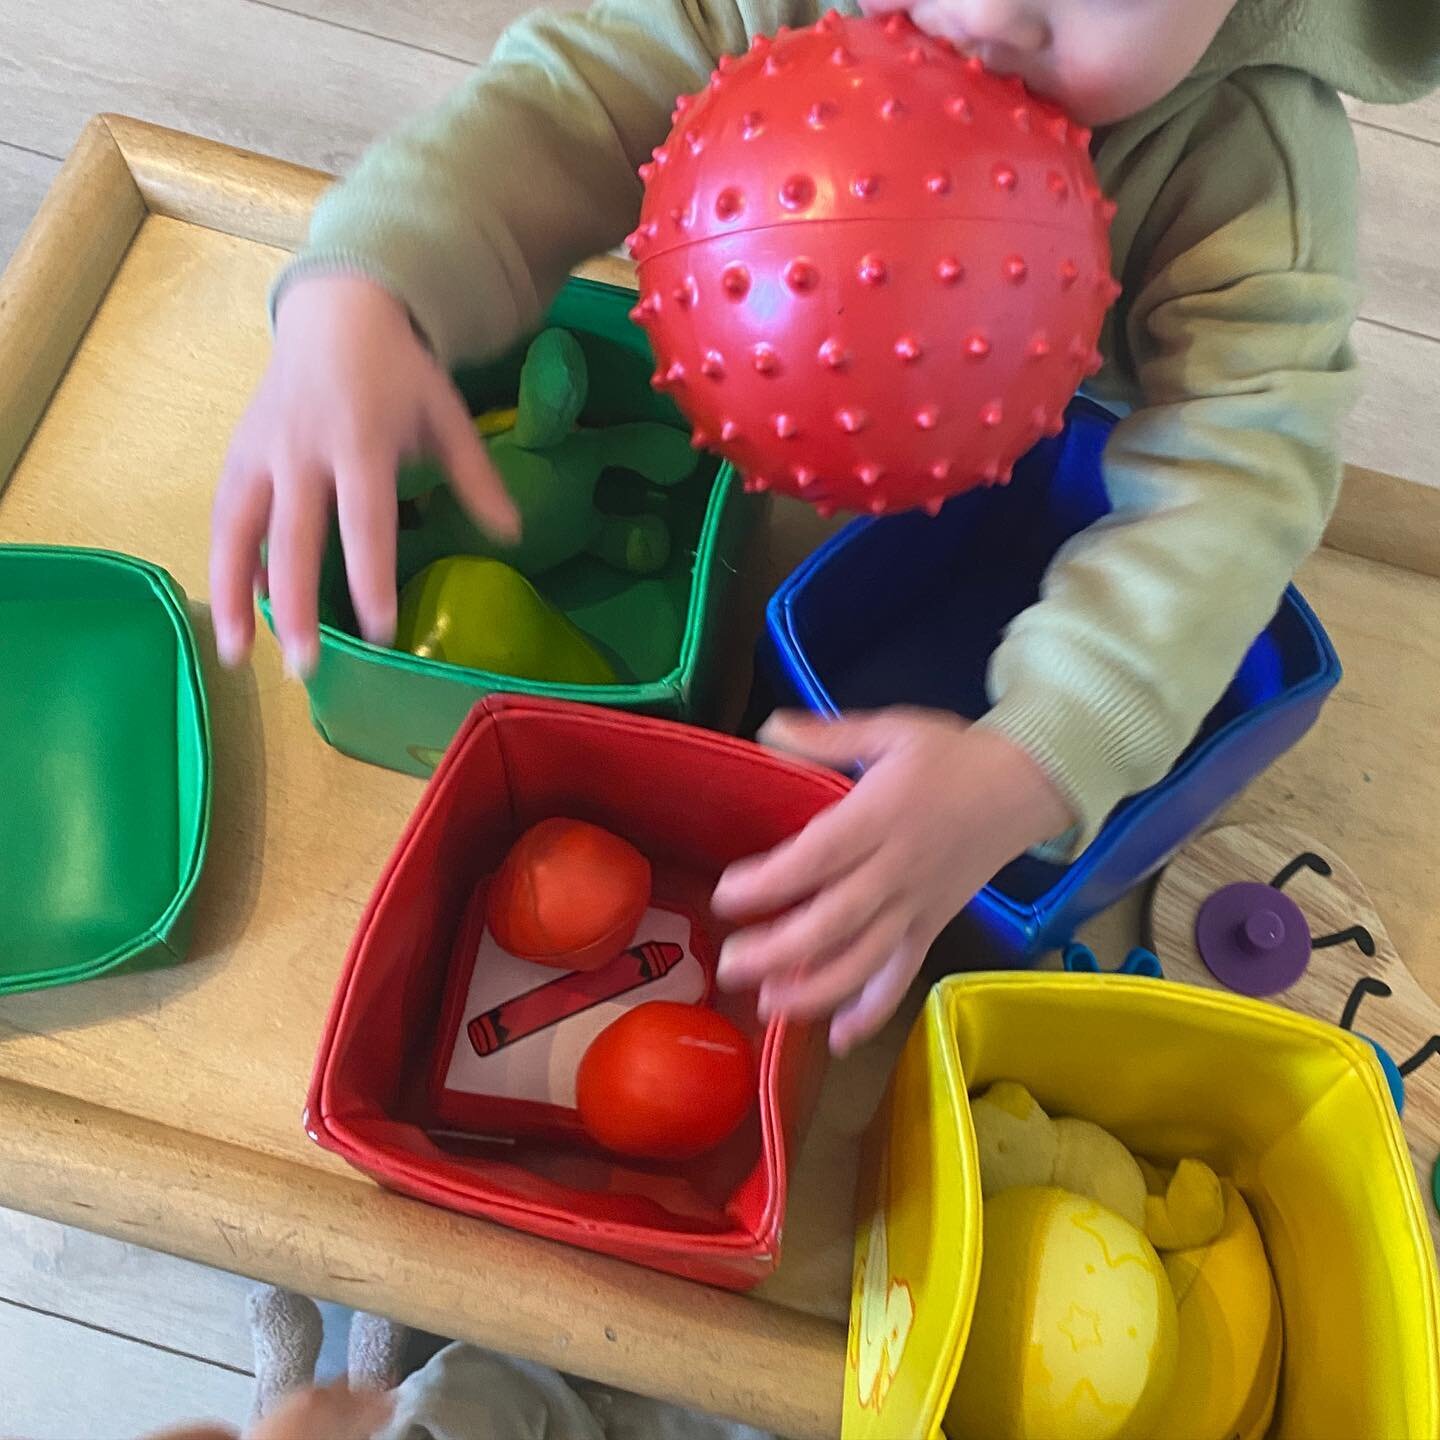 Toy in the mouth? No problem! 

It&rsquo;s developmentally appropriate to put ALL THE TOYS in our mouths when we are young, that&rsquo;s why we allow this exploration and put the toy straight in the dirty toy bucket when done. Cleaning and sanitizing